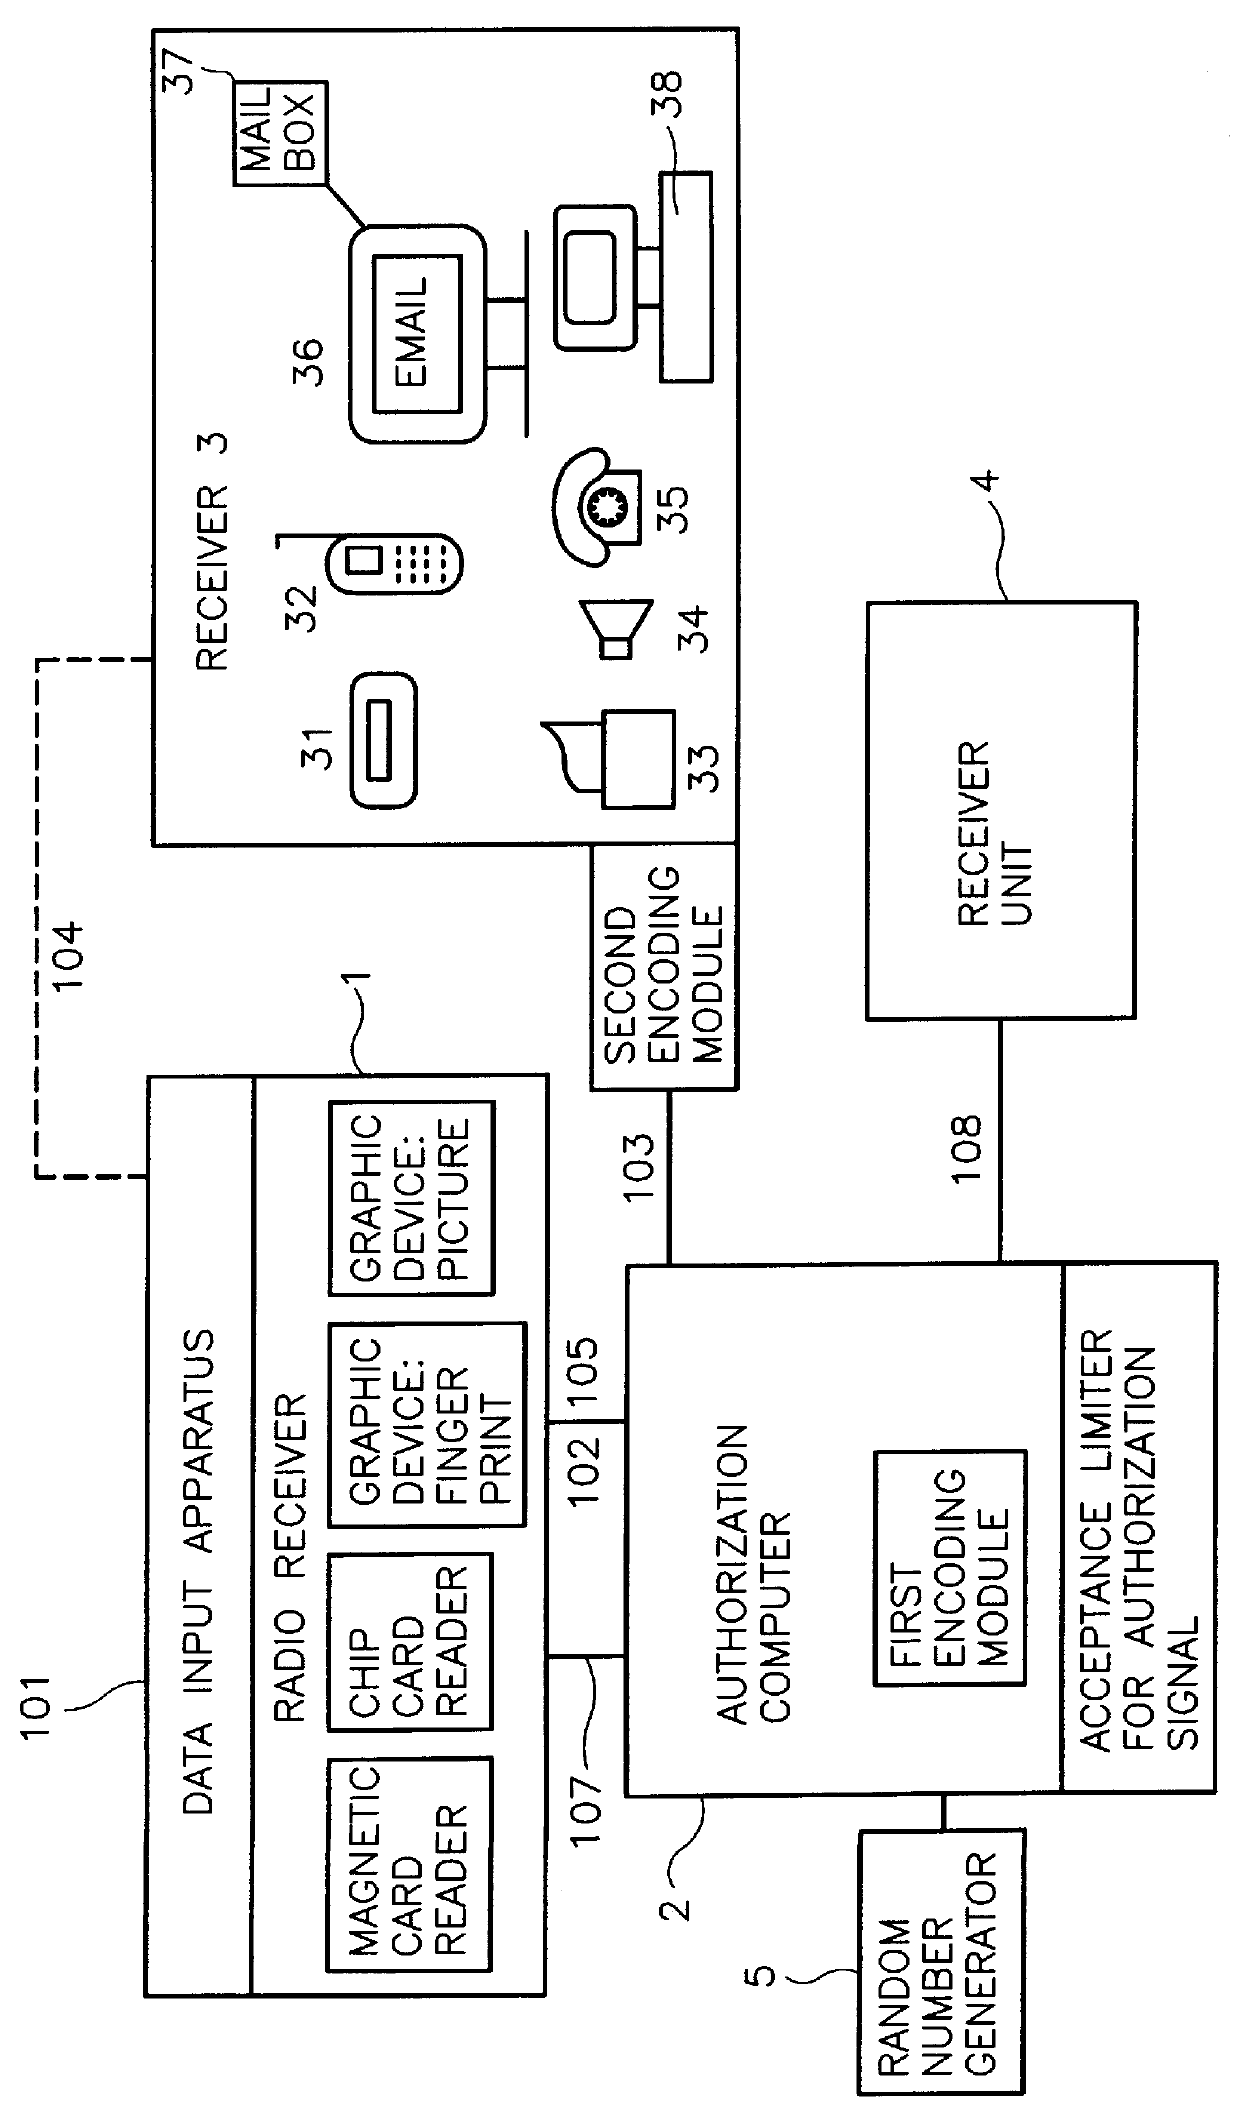 Method for authorizing in data transmission systems